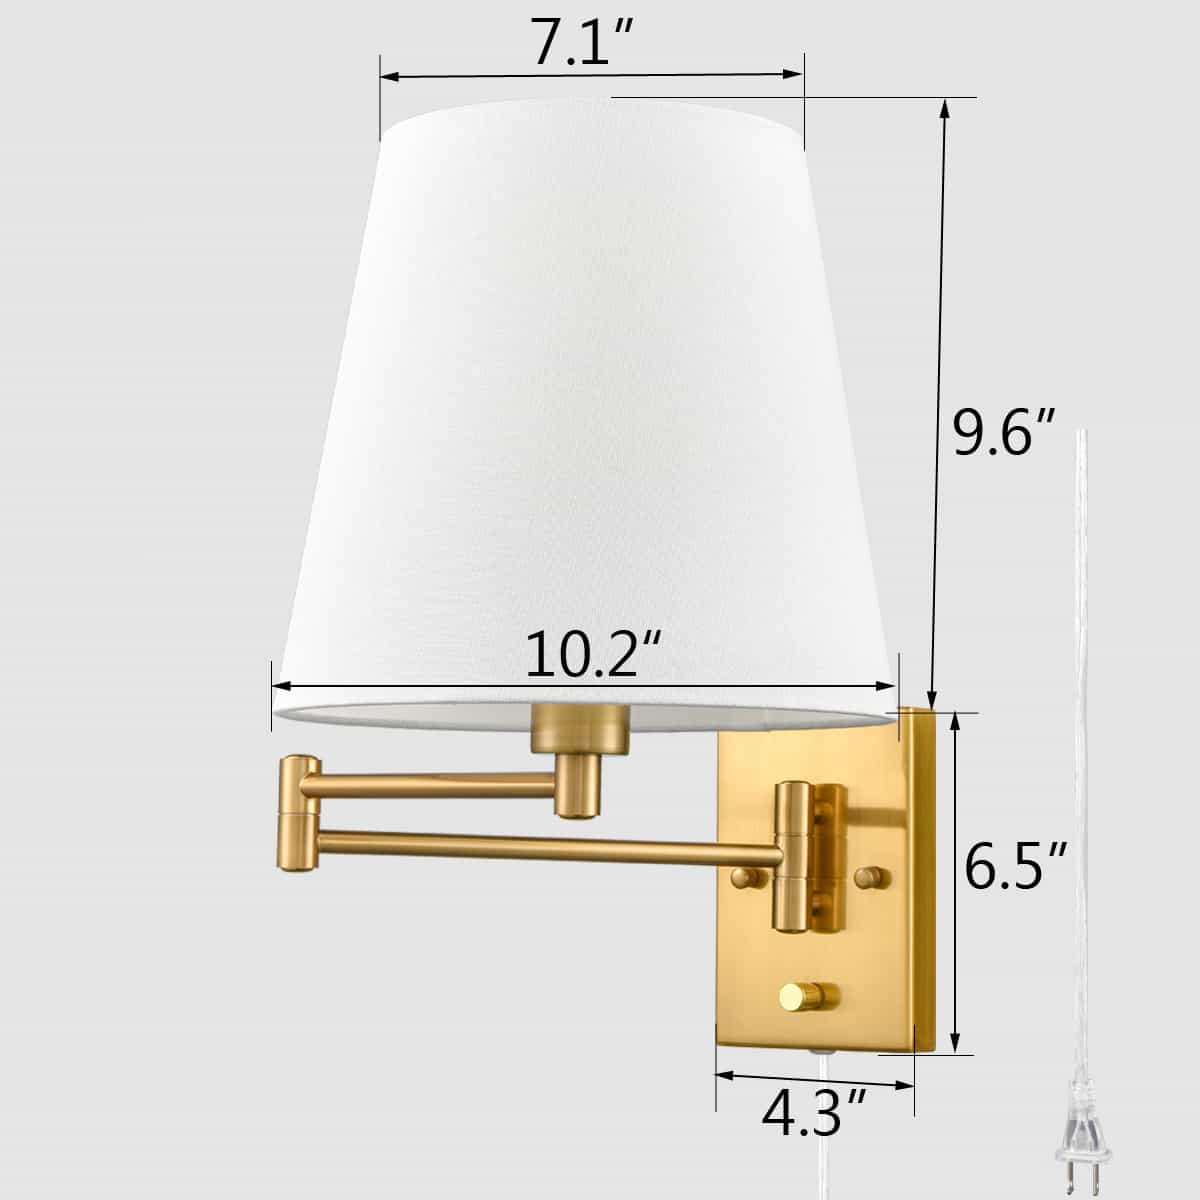 Beige Wall Sconces Set of Two Plug-in Wall Lamp Swing Arm Wall Lights